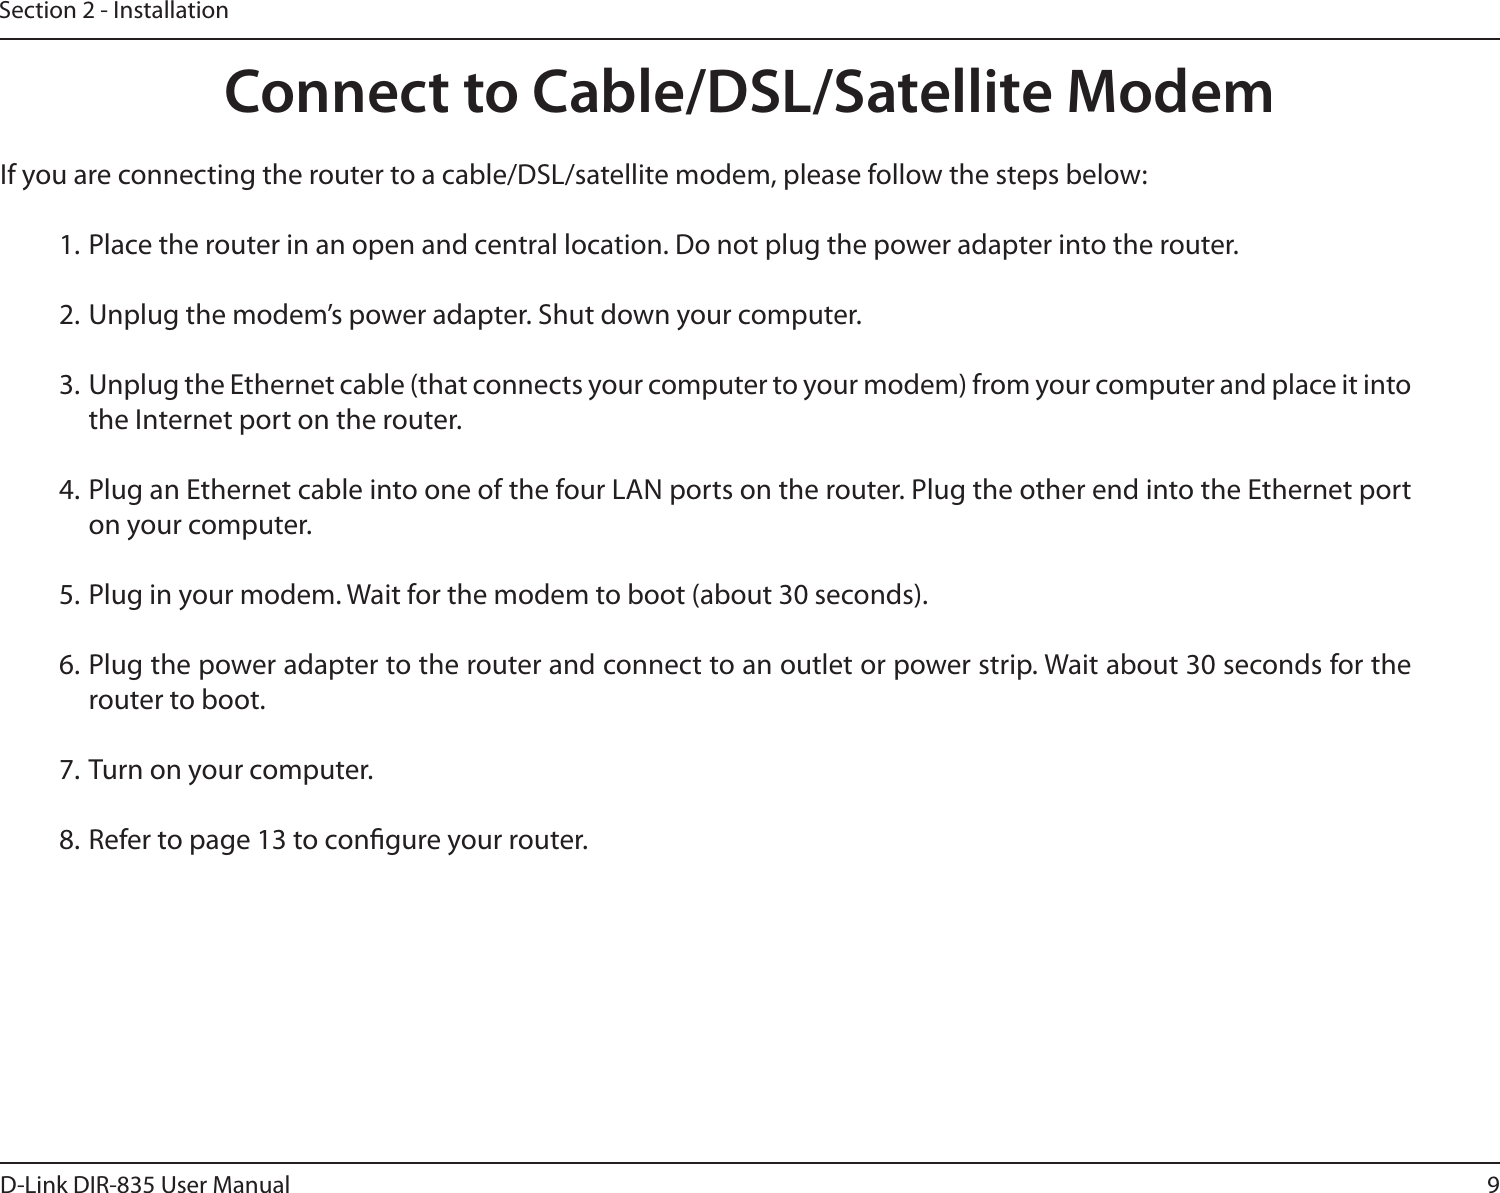 9D-Link DIR-835 User ManualSection 2 - InstallationIf you are connecting the router to a cable/DSL/satellite modem, please follow the steps below:1. Place the router in an open and central location. Do not plug the power adapter into the router.2. Unplug the modem’s power adapter. Shut down your computer.3. Unplug the Ethernet cable (that connects your computer to your modem) from your computer and place it into the Internet port on the router.4. Plug an Ethernet cable into one of the four LAN ports on the router. Plug the other end into the Ethernet port on your computer.5. Plug in your modem. Wait for the modem to boot (about 30 seconds).6. Plug the power adapter to the router and connect to an outlet or power strip. Wait about 30 seconds for the router to boot.7. Turn on your computer.8. Refer to page 13 to congure your router.Connect to Cable/DSL/Satellite Modem